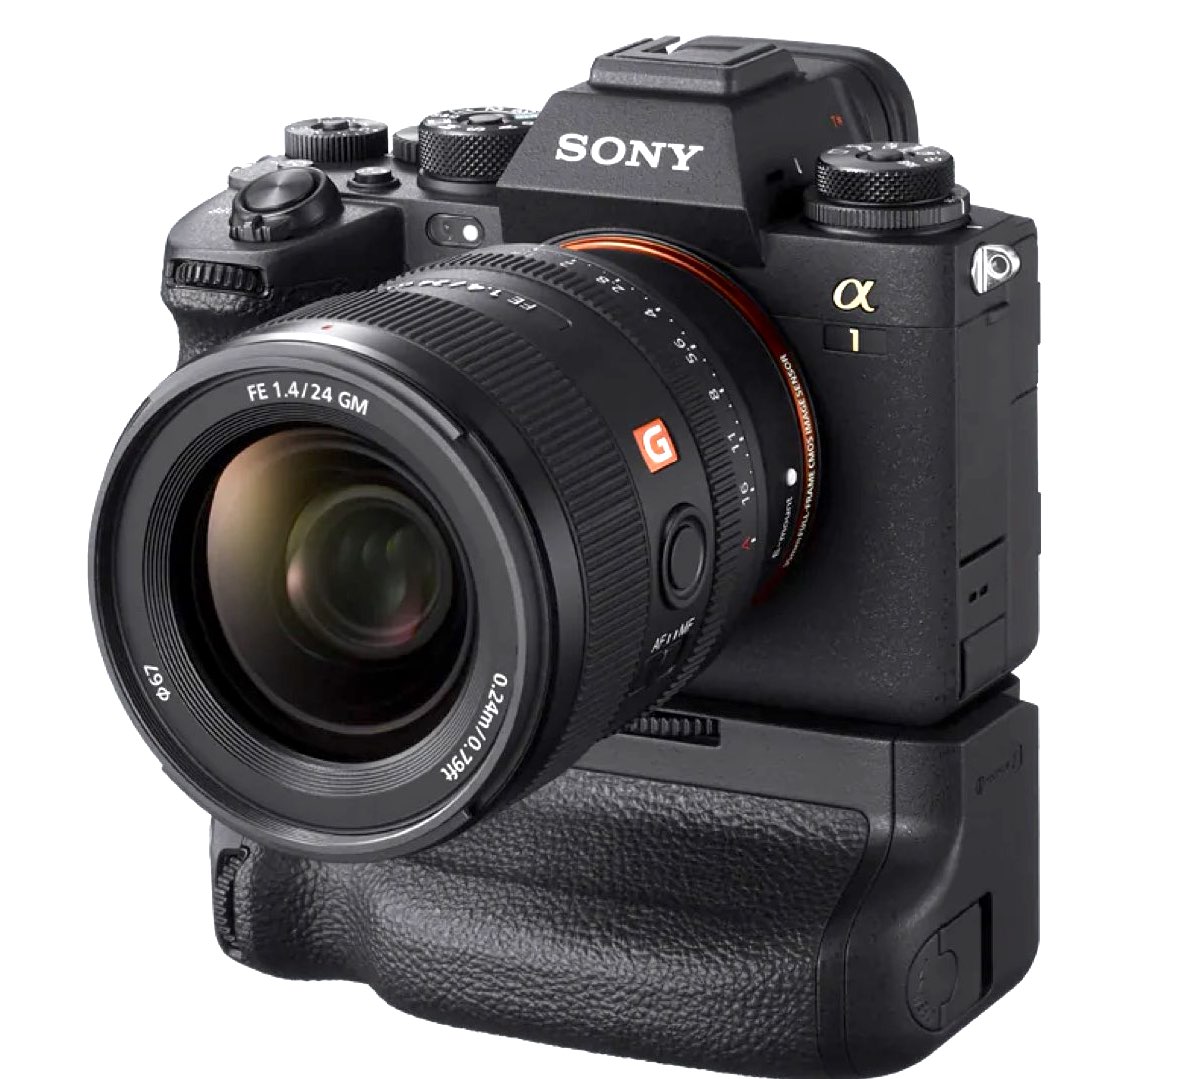 New 50MP, 30 fps, 8K30p, $6,500 Sony A1 mirrorless camera (ILCE-1) announced - Photo Rumors